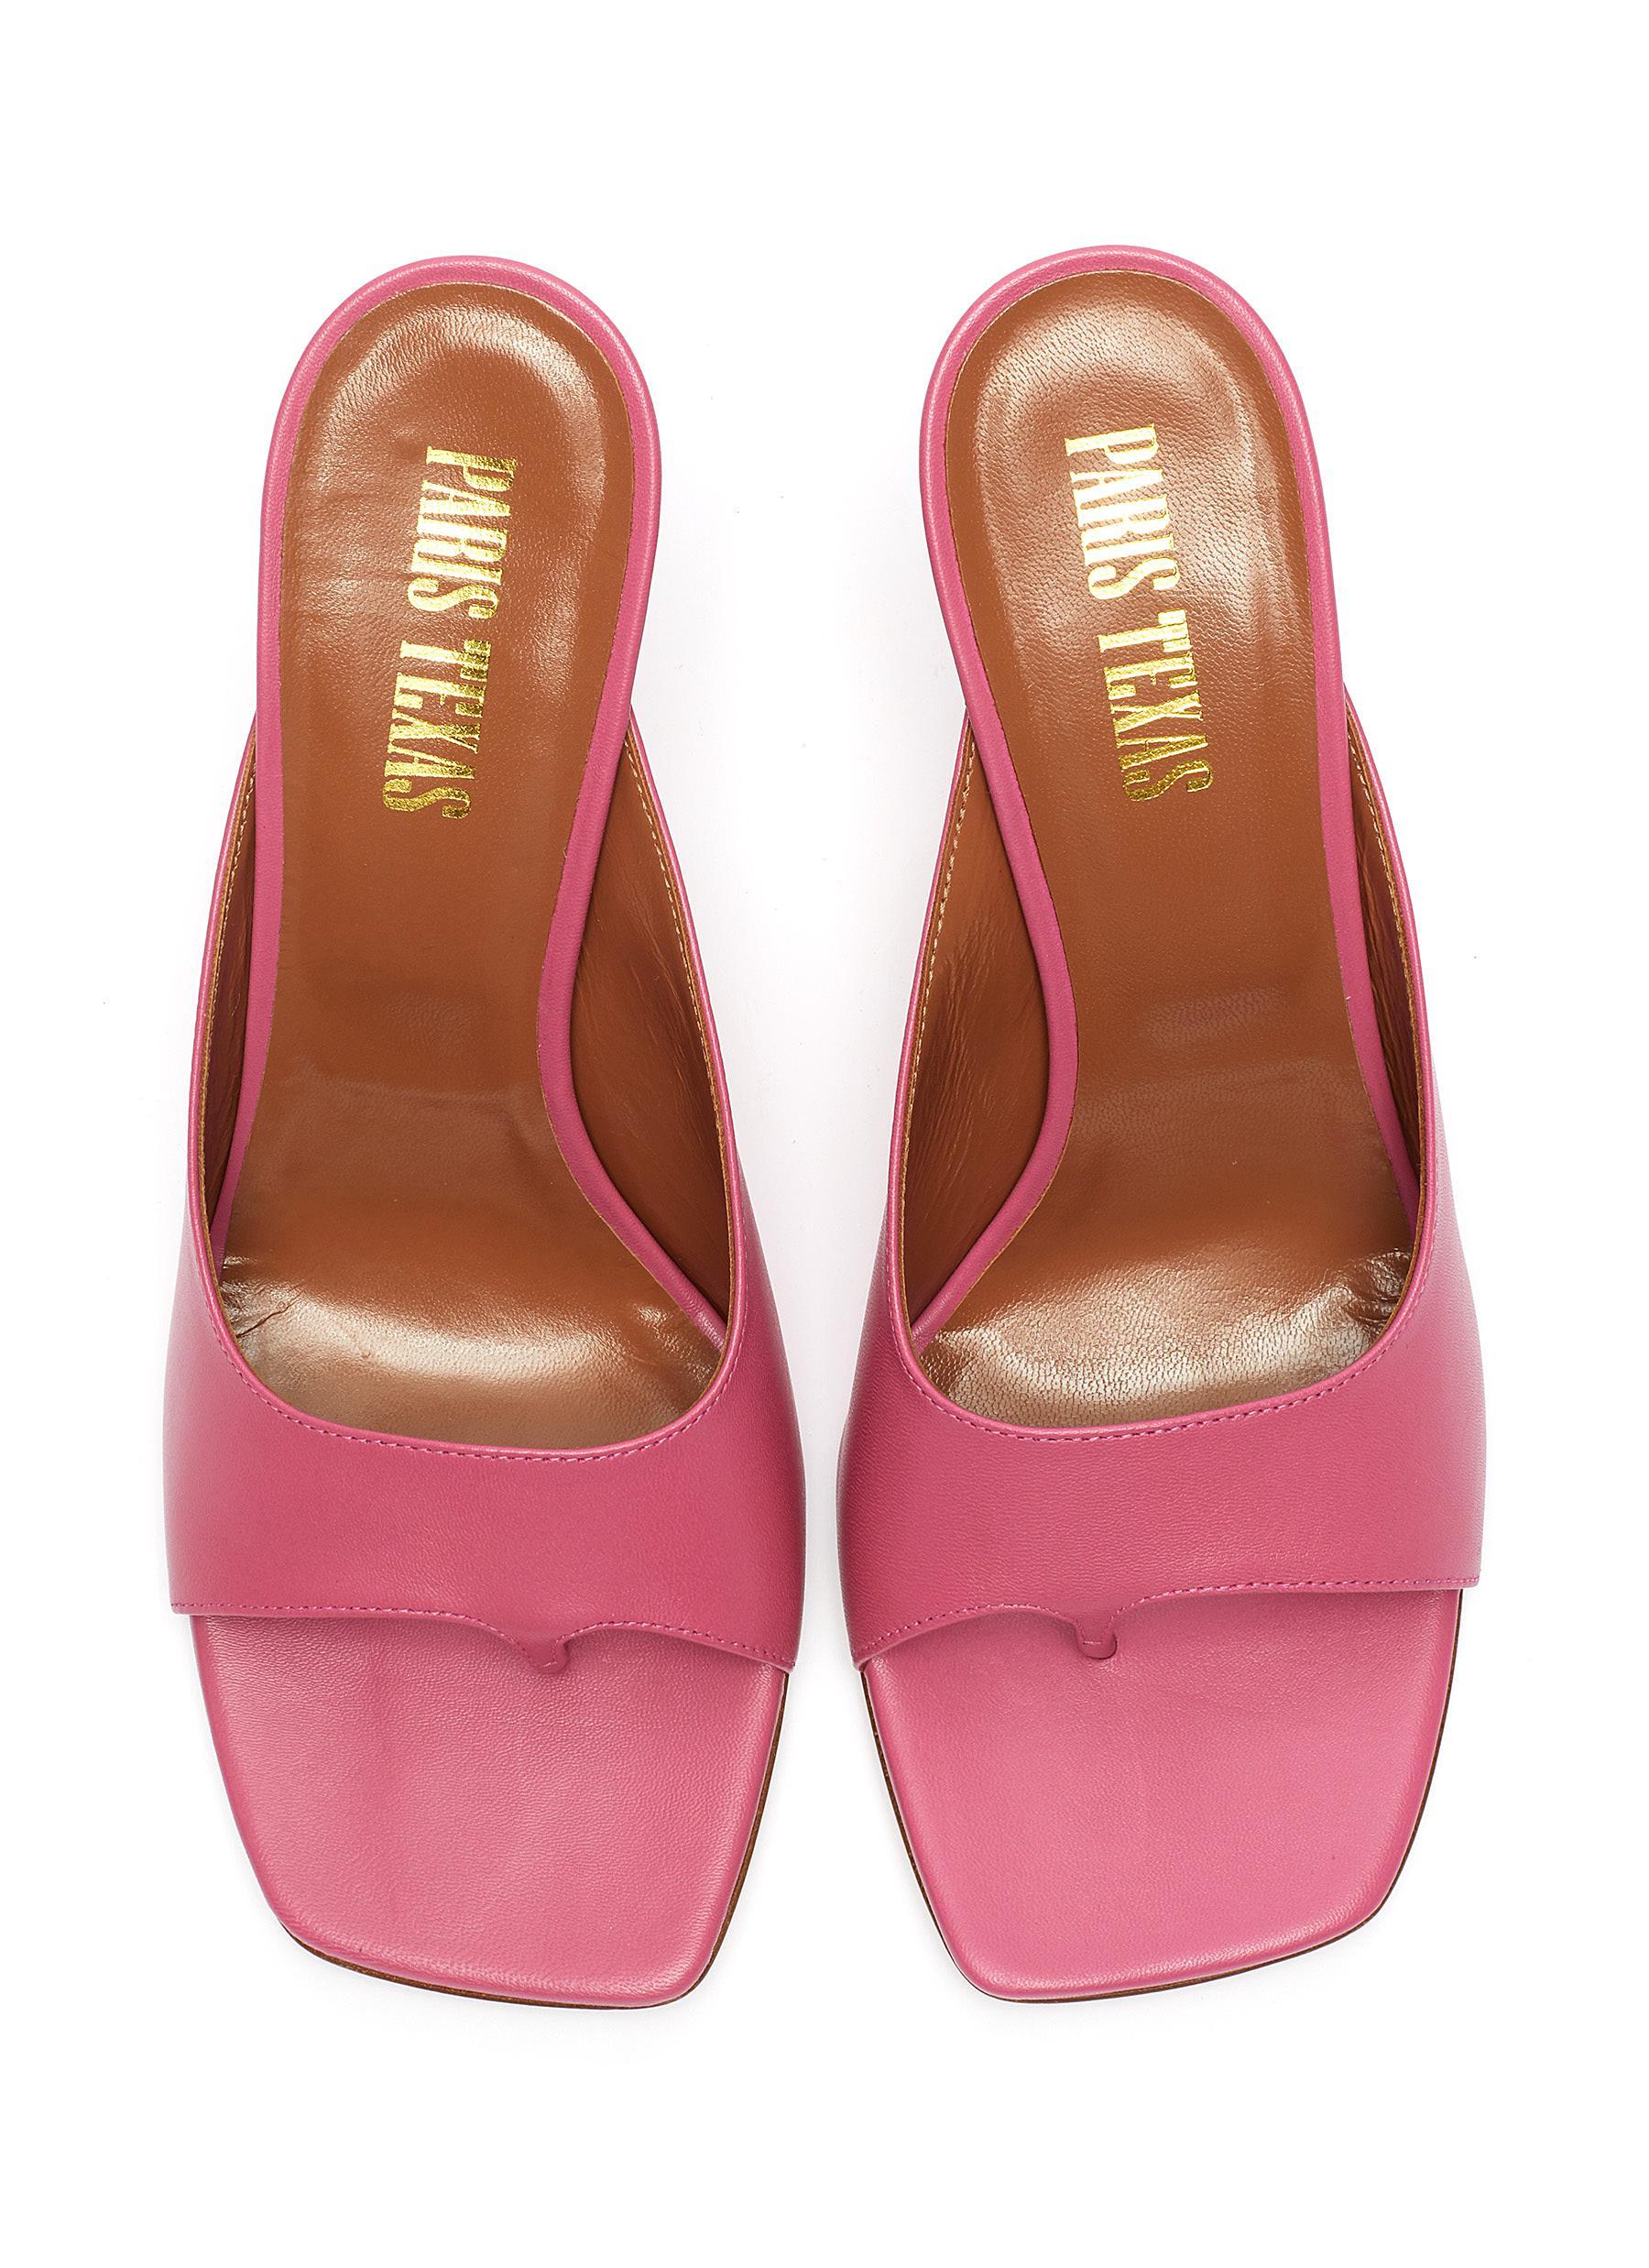 Paris Texas Leather Thong Mules in Pink - Lyst